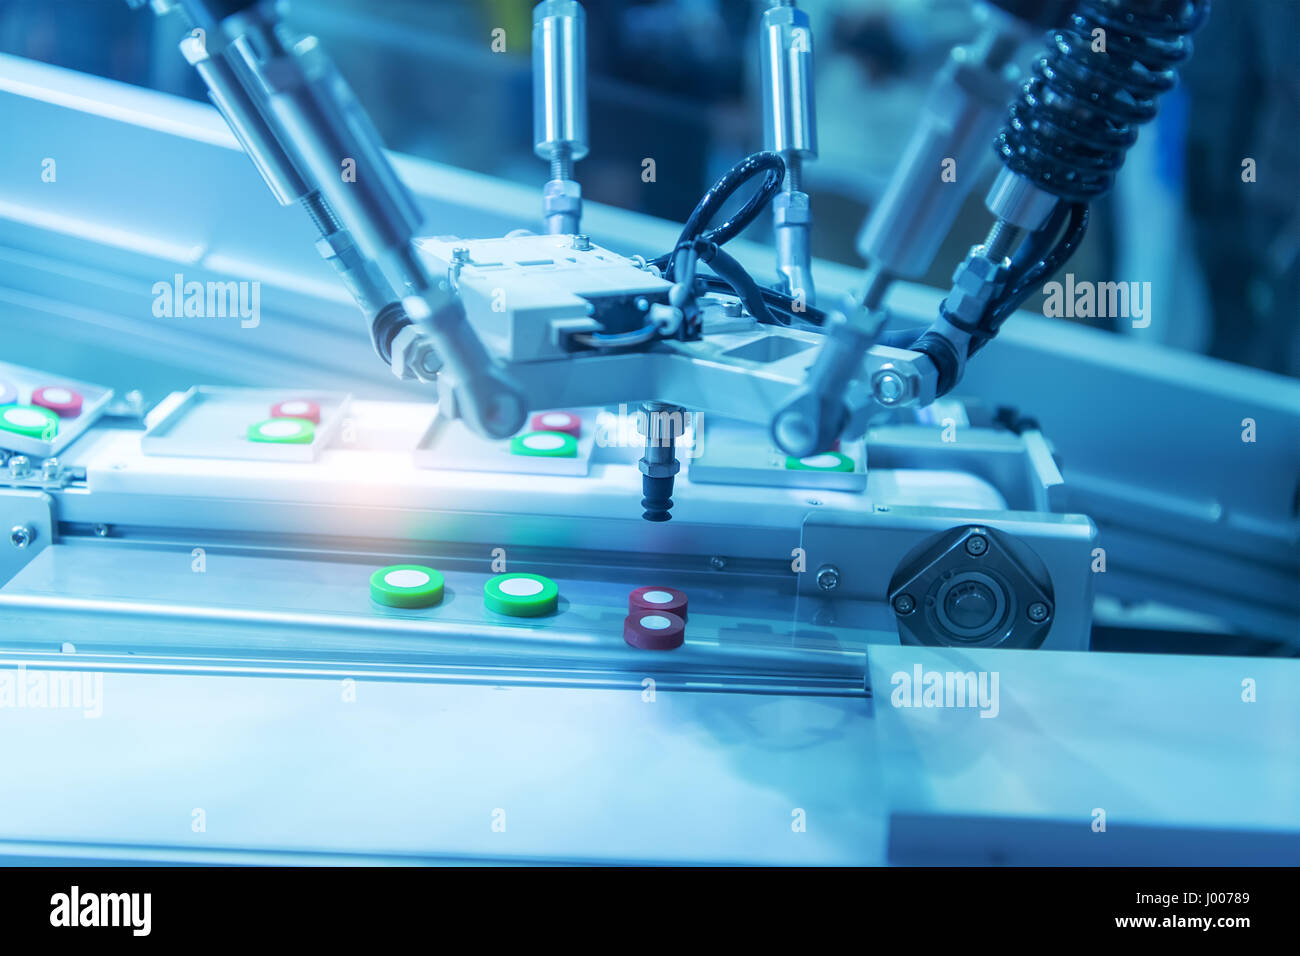 industrial machine robot in assembly line working in factory. Smart factory industry 4.0 concept. Stock Photo